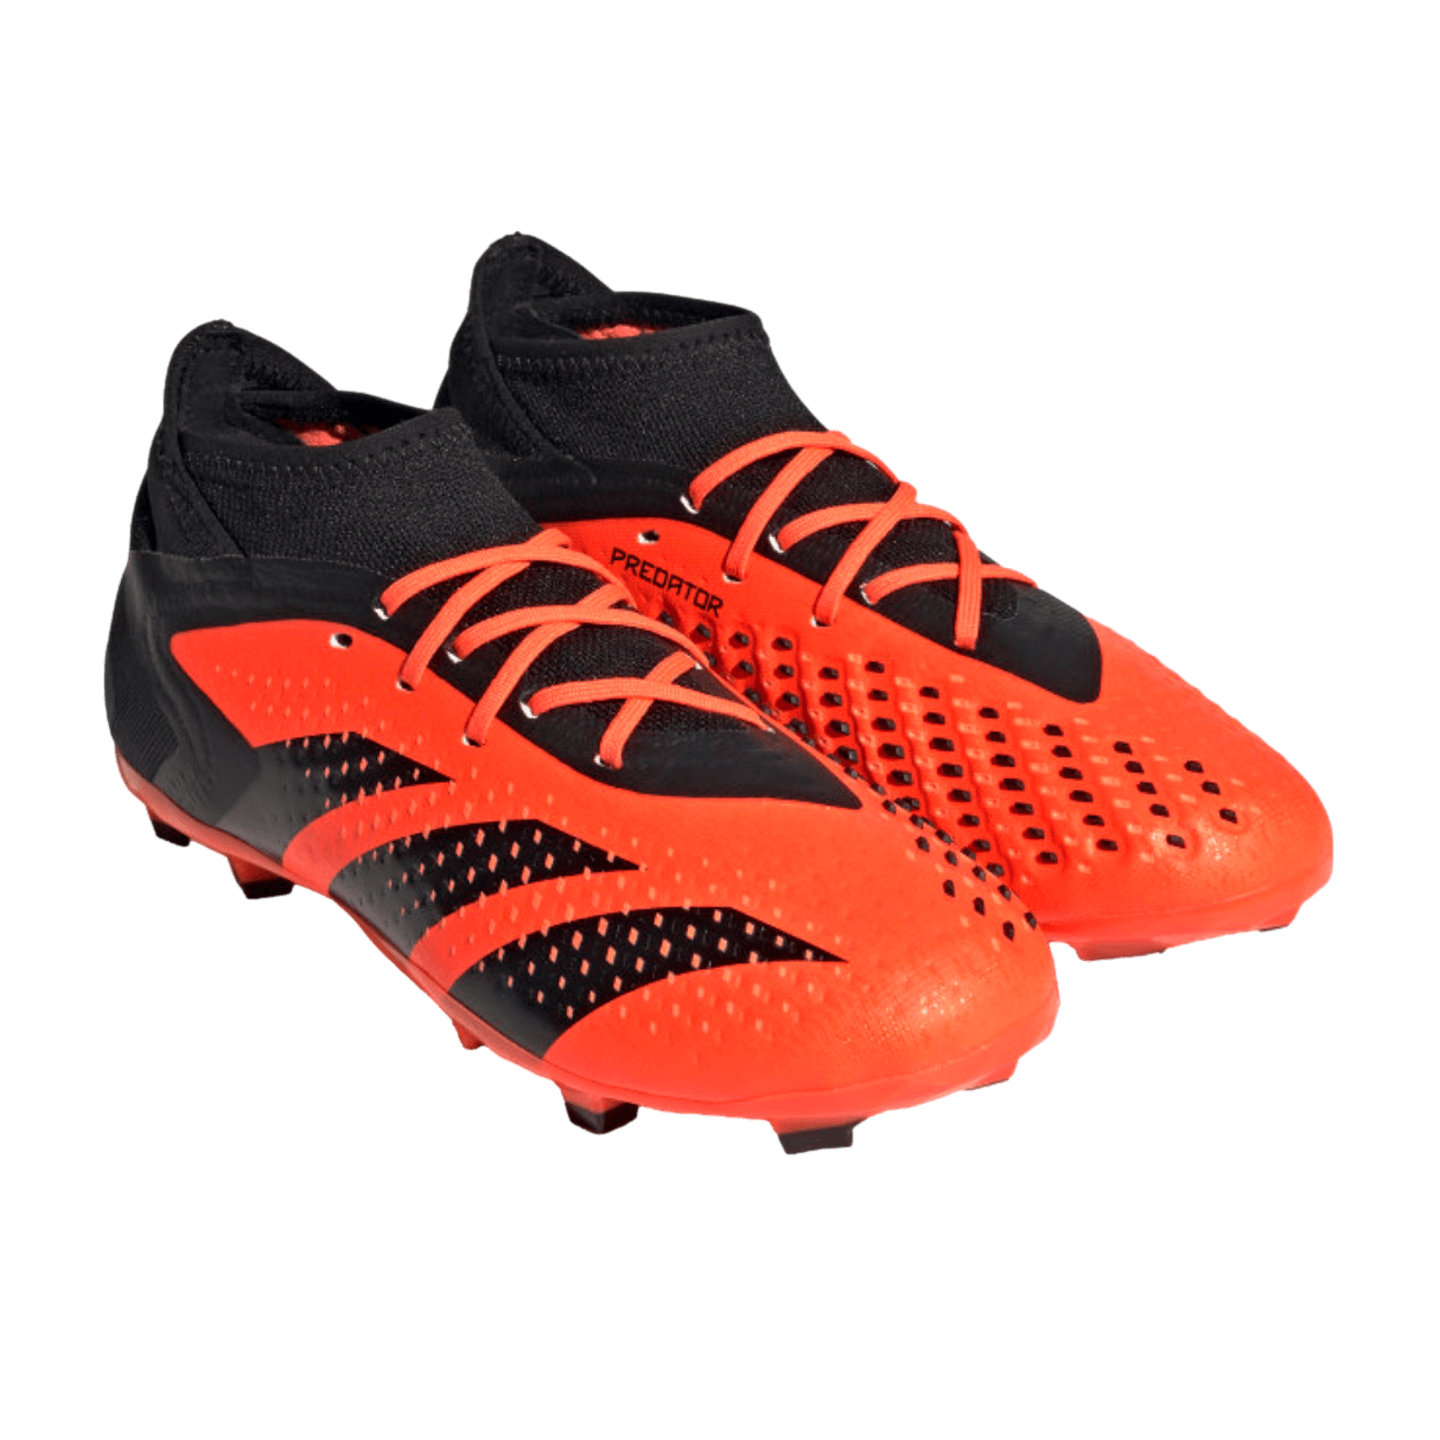 Adidas Predator Accuracy.1 Youth Firm Ground Cleats